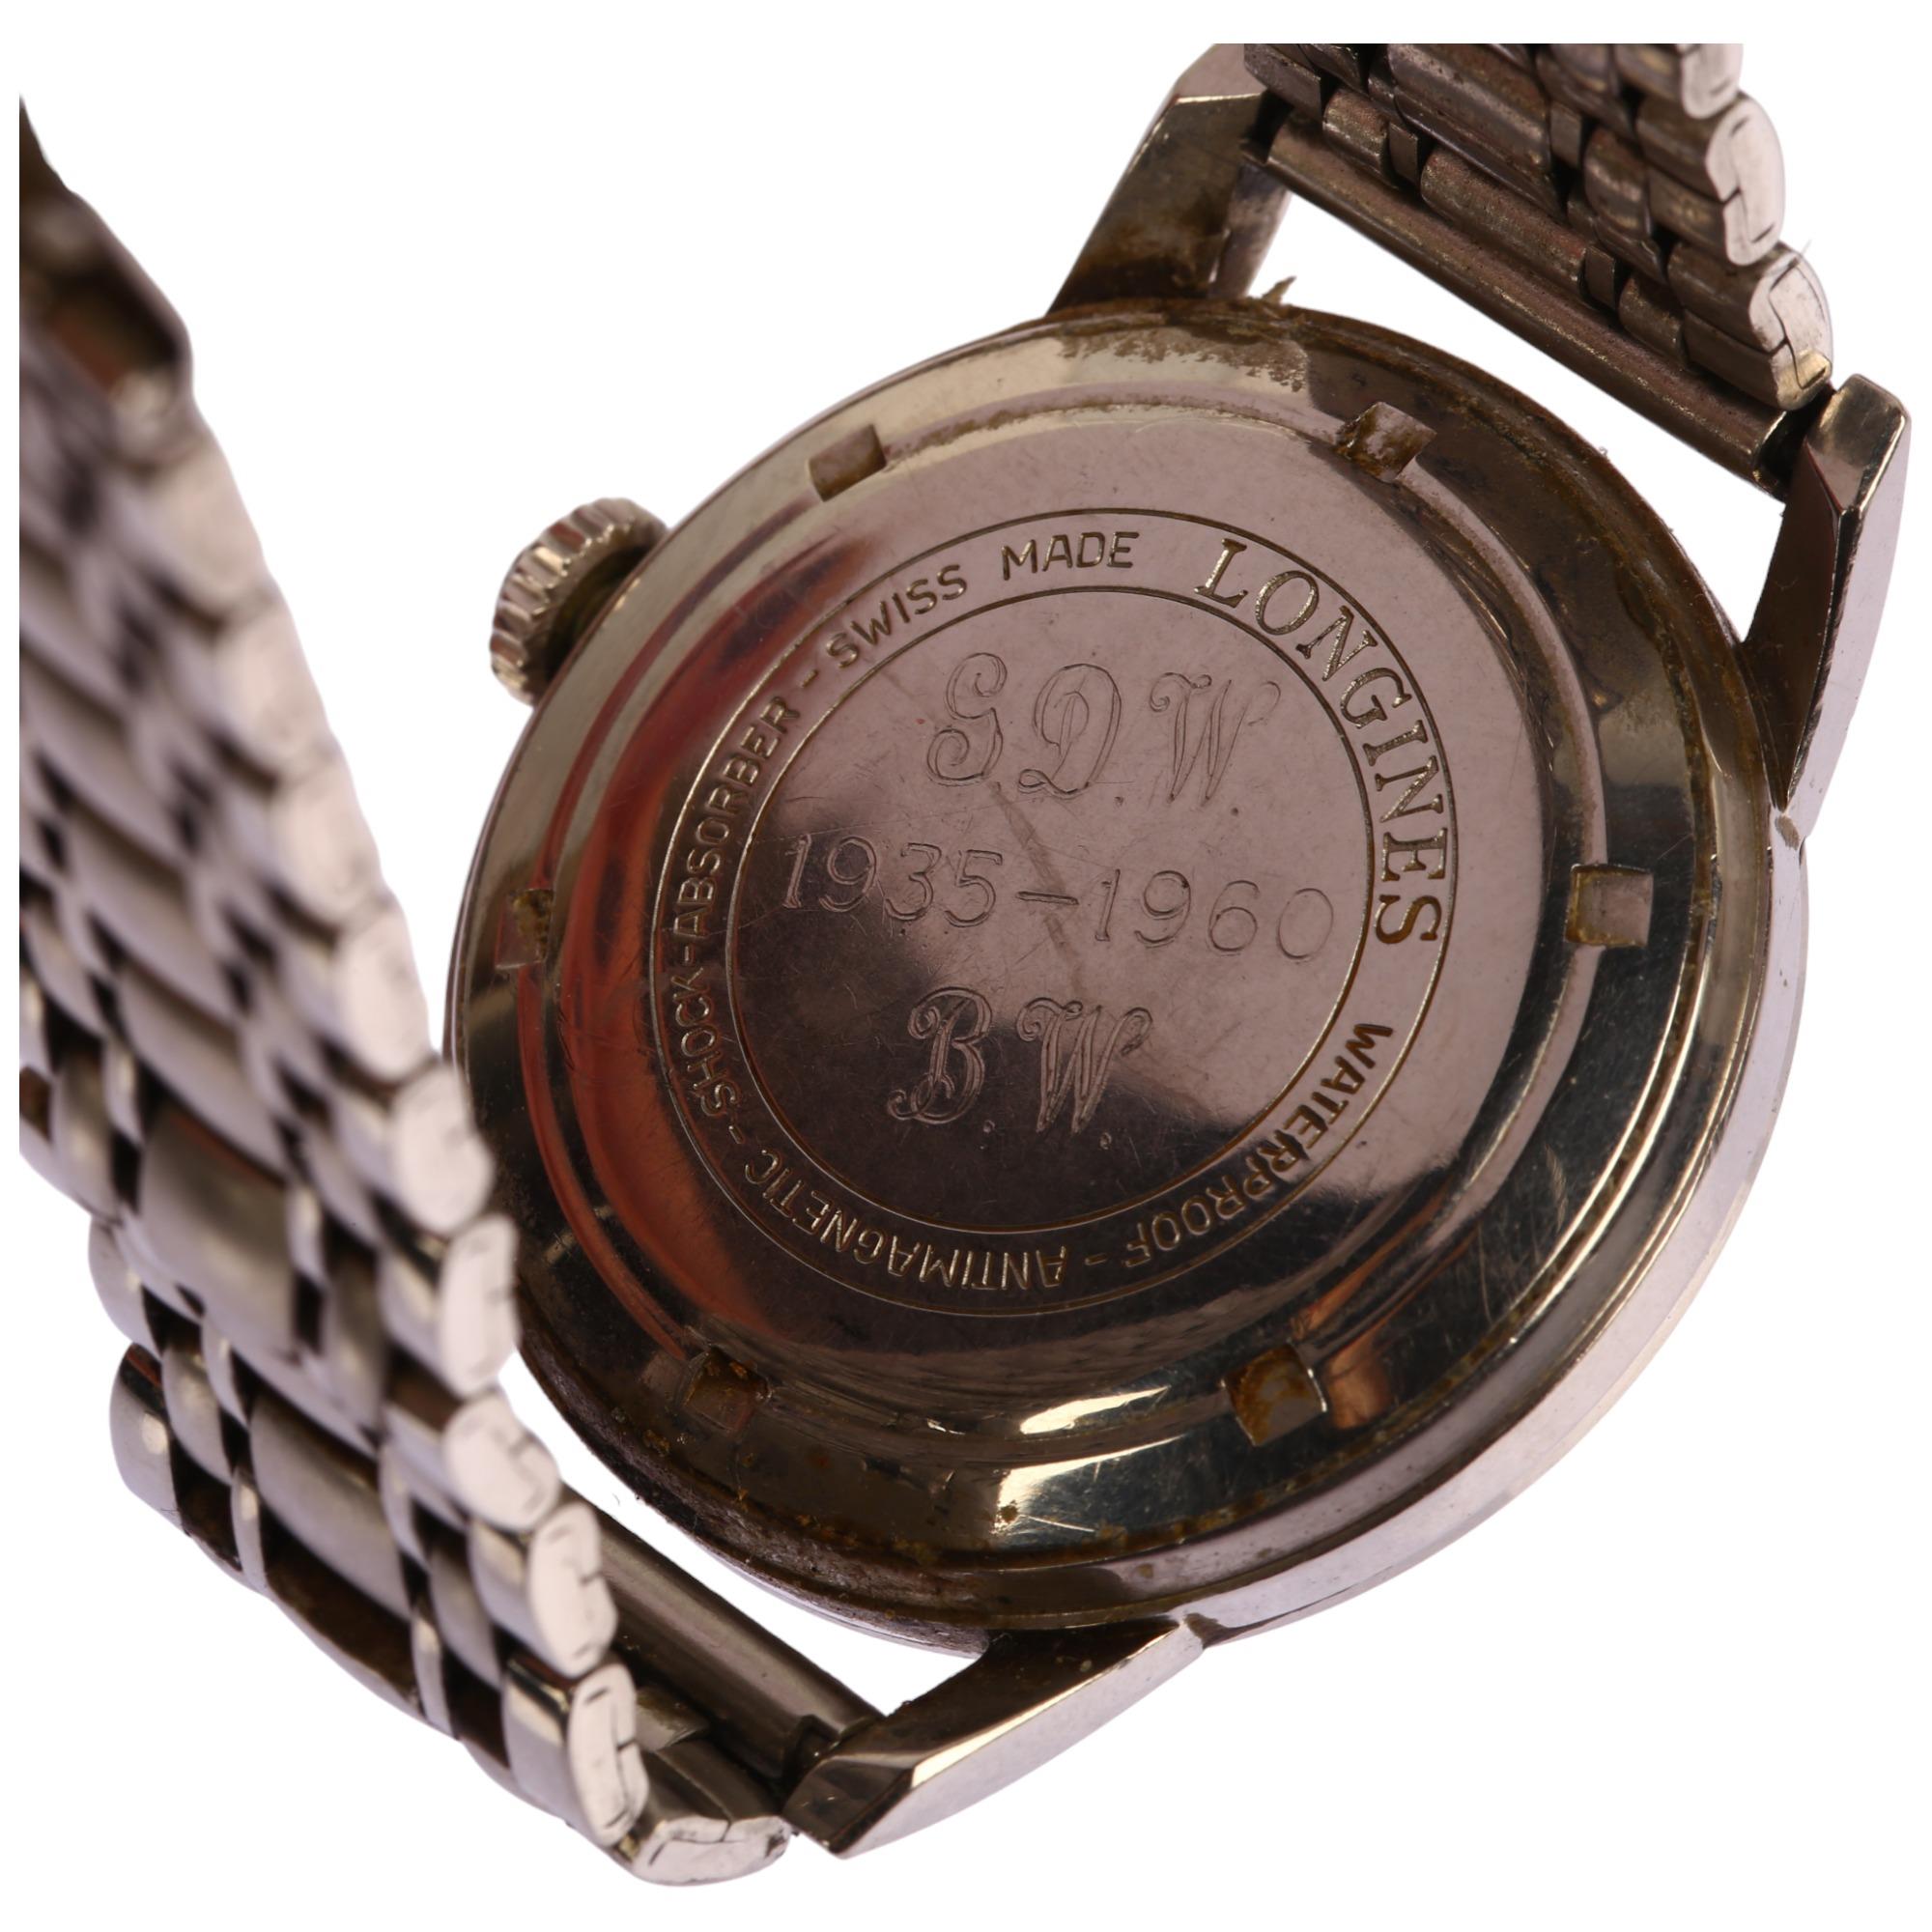 LONGINES - a Vintage stainless steel mechanical bracelet watch, circa 1960s, silvered dial with - Image 4 of 5